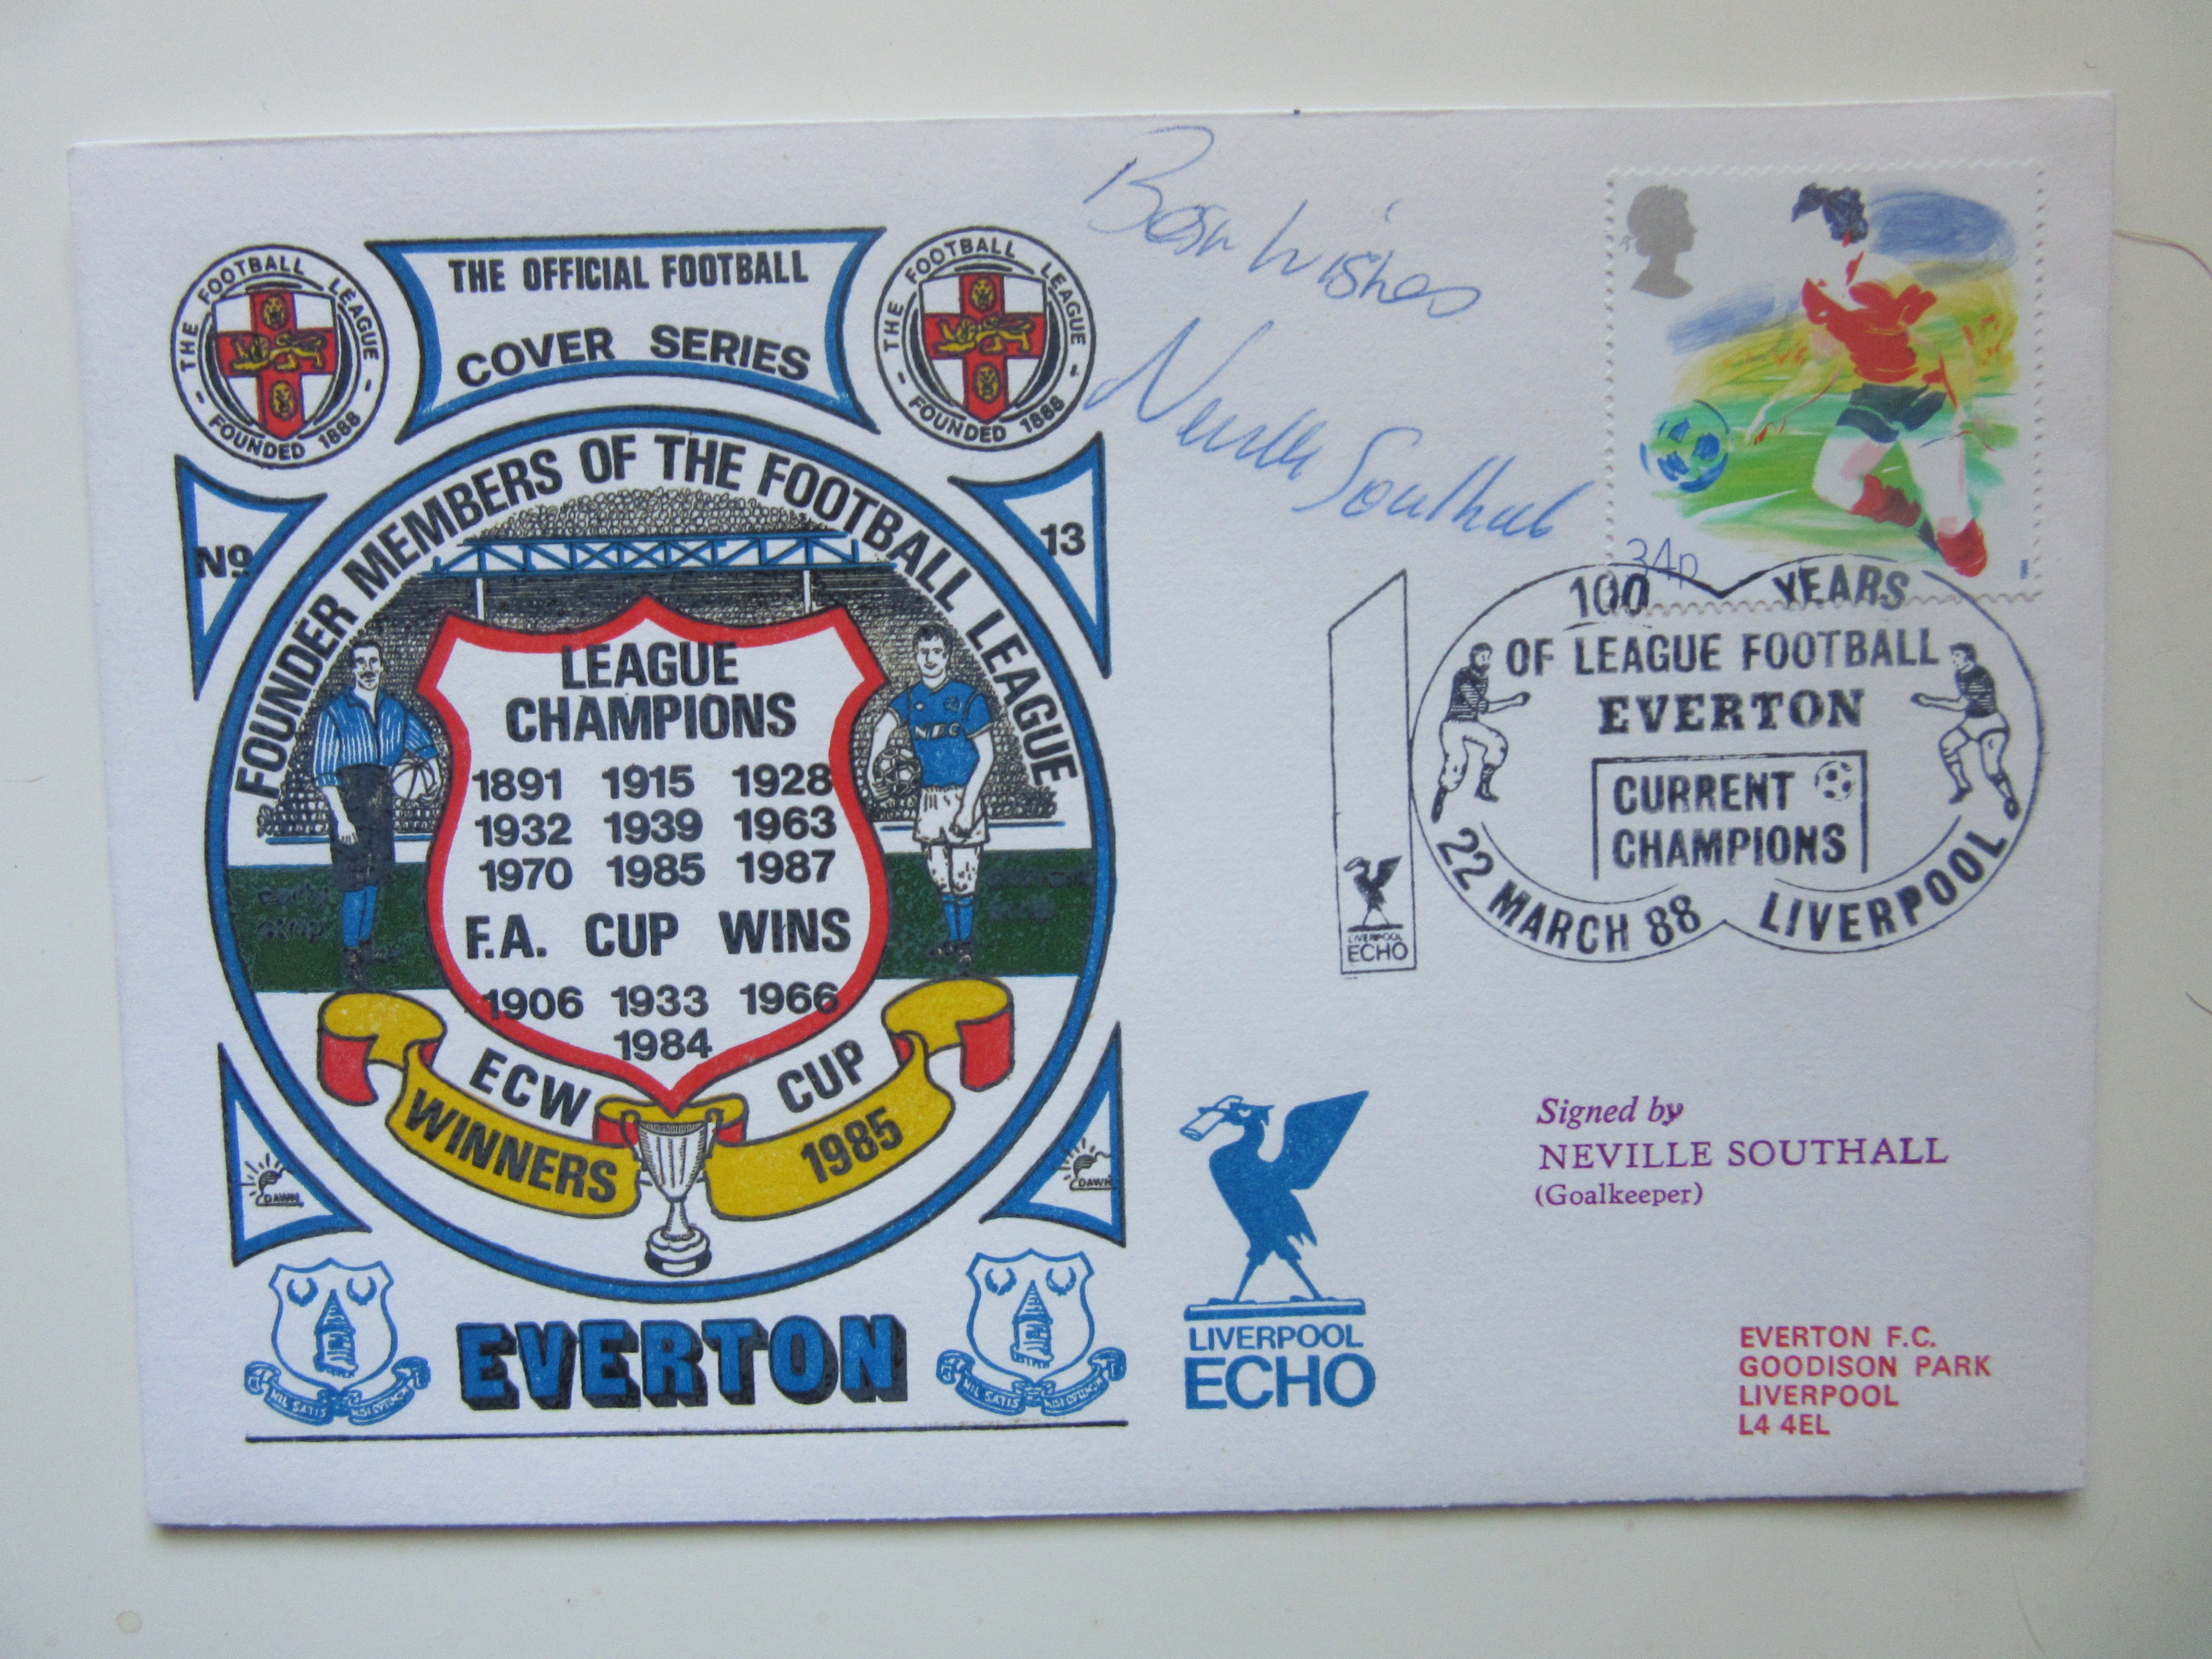 1988 EVERTON LIMITED EDITION POSTAL COVER AUTOGRAPHED BY NEVILLE SOUTHALL